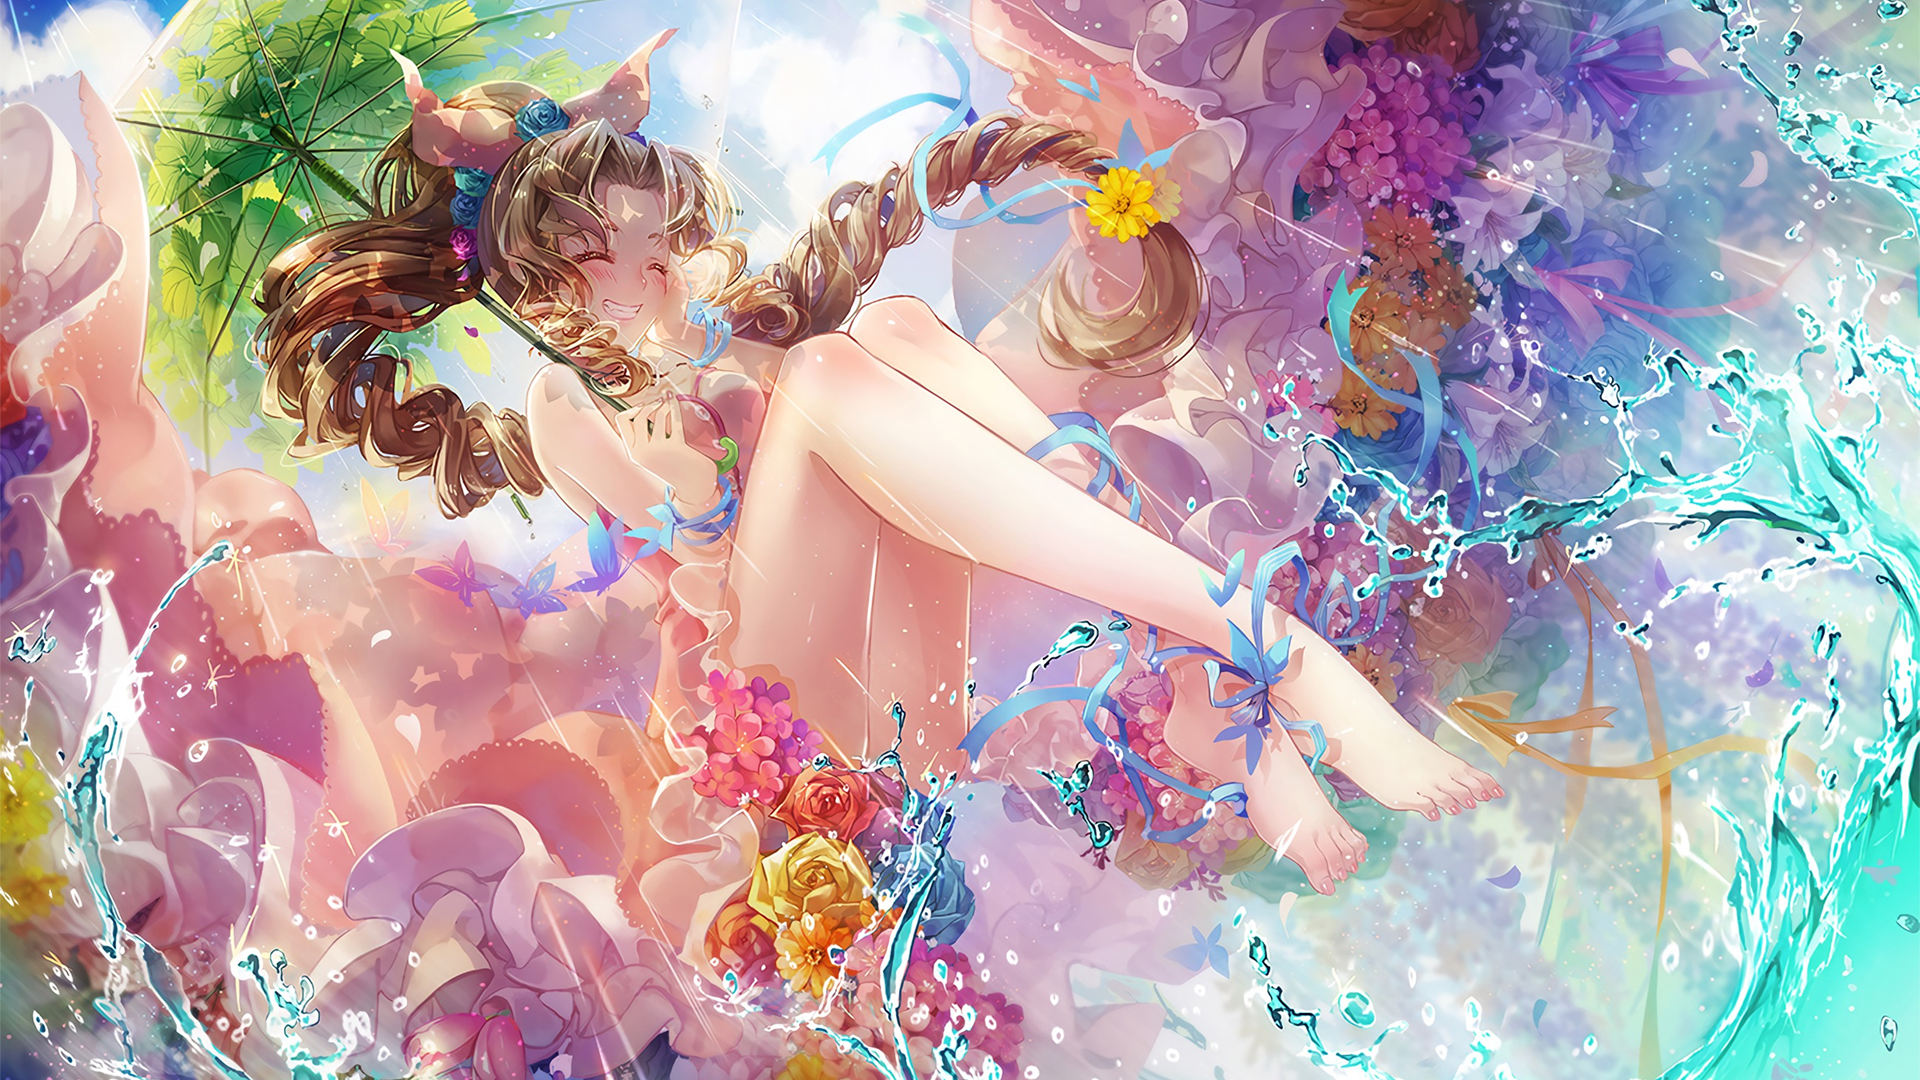 Anime 1920x1080 Final Fantasy VII Aerith Gainsborough water Final Fantasy feet closed eyes twintails brunette umbrella barefoot flowers dress sunlight hand on face bracelets butterfly insect frills blushing flower in hair